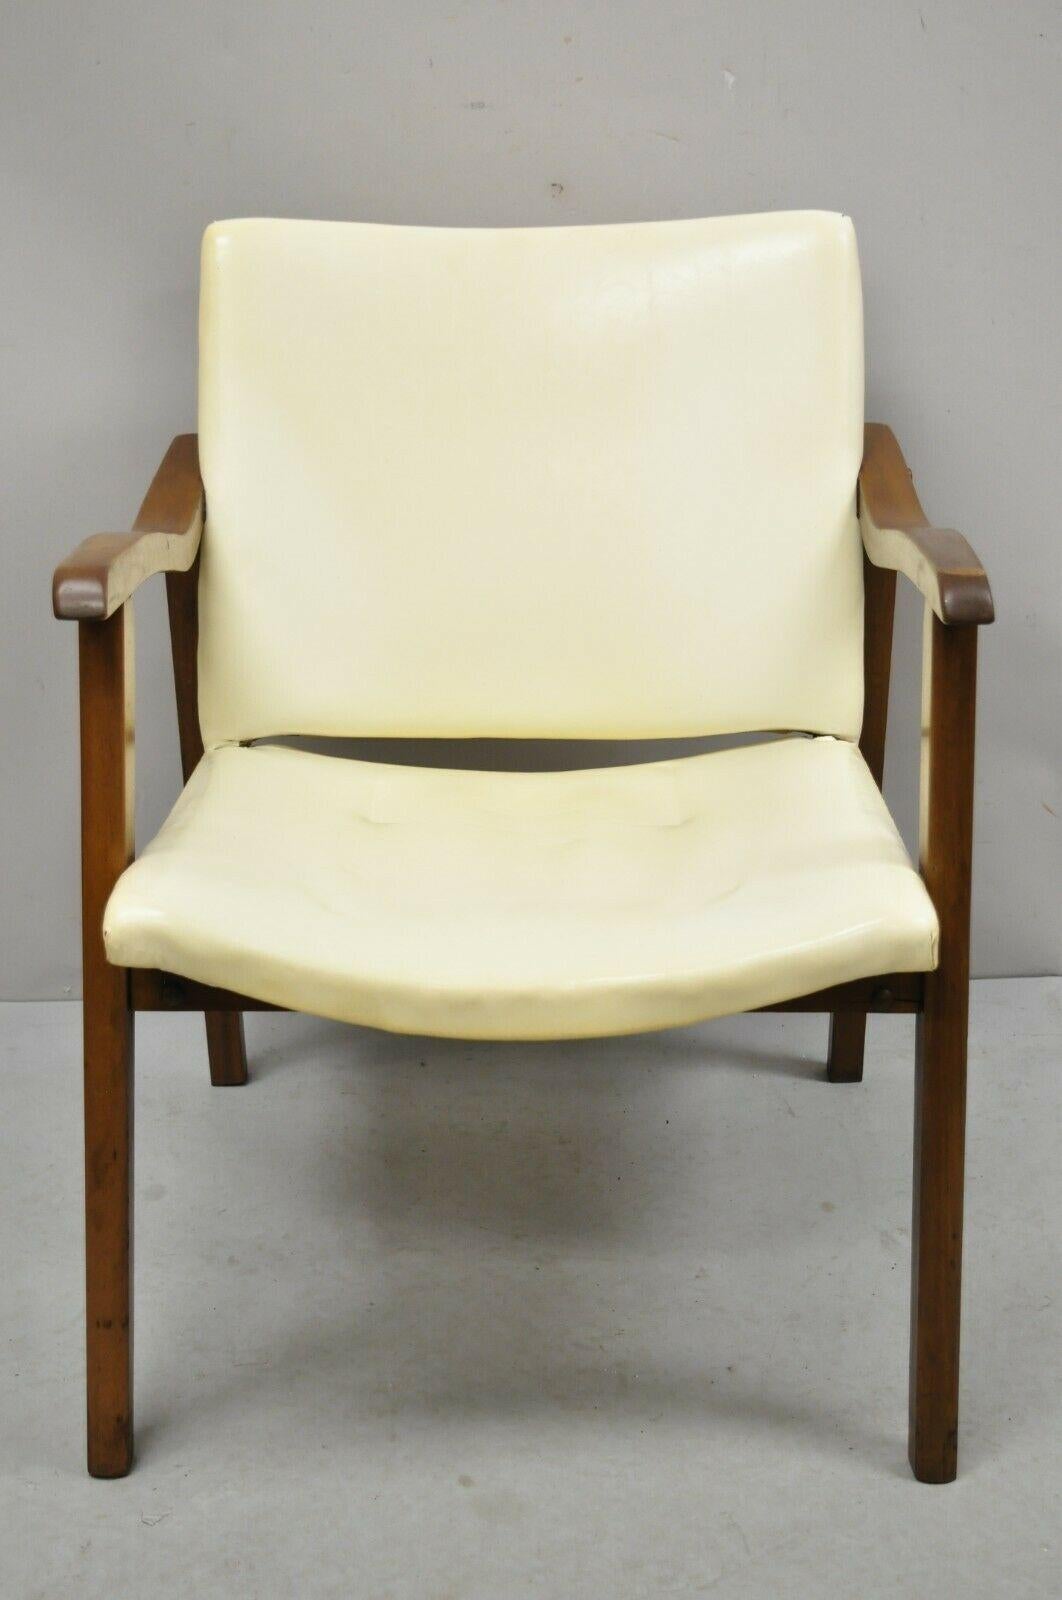 Mid-Century Modern walnut wood frame vinyl upholstered lounge arm chair. Item: features cream colored Naugahyde upholstery, solid wood frame, tapered legs, clean modernist lines, great style and form. Circa 1960s. Measurements: 28